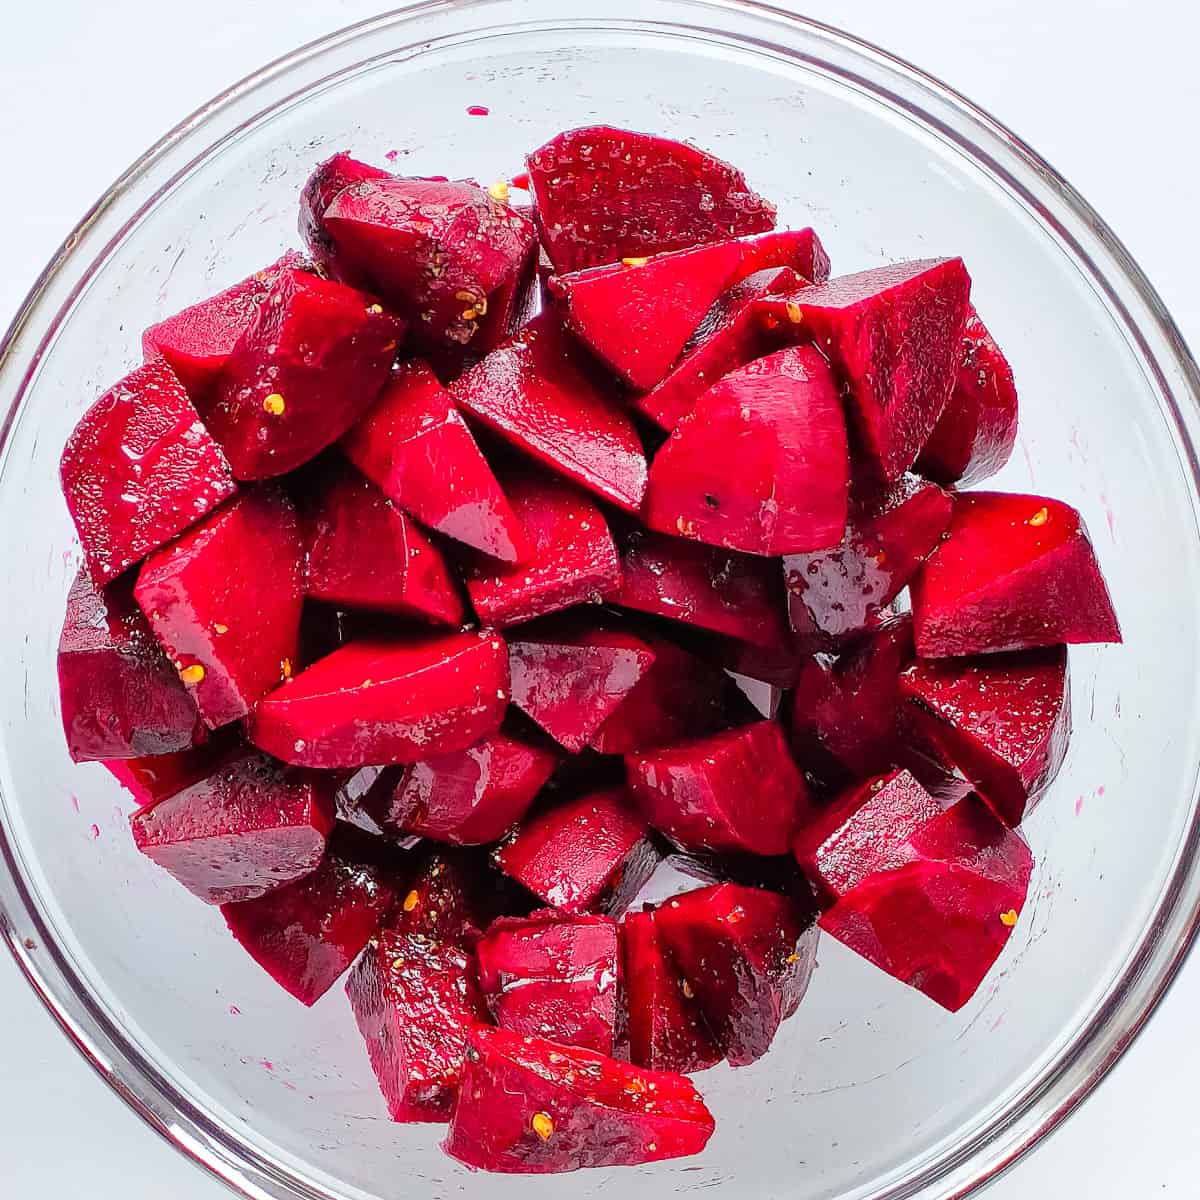 Seasoned beetroot cubes in a glass bowl.